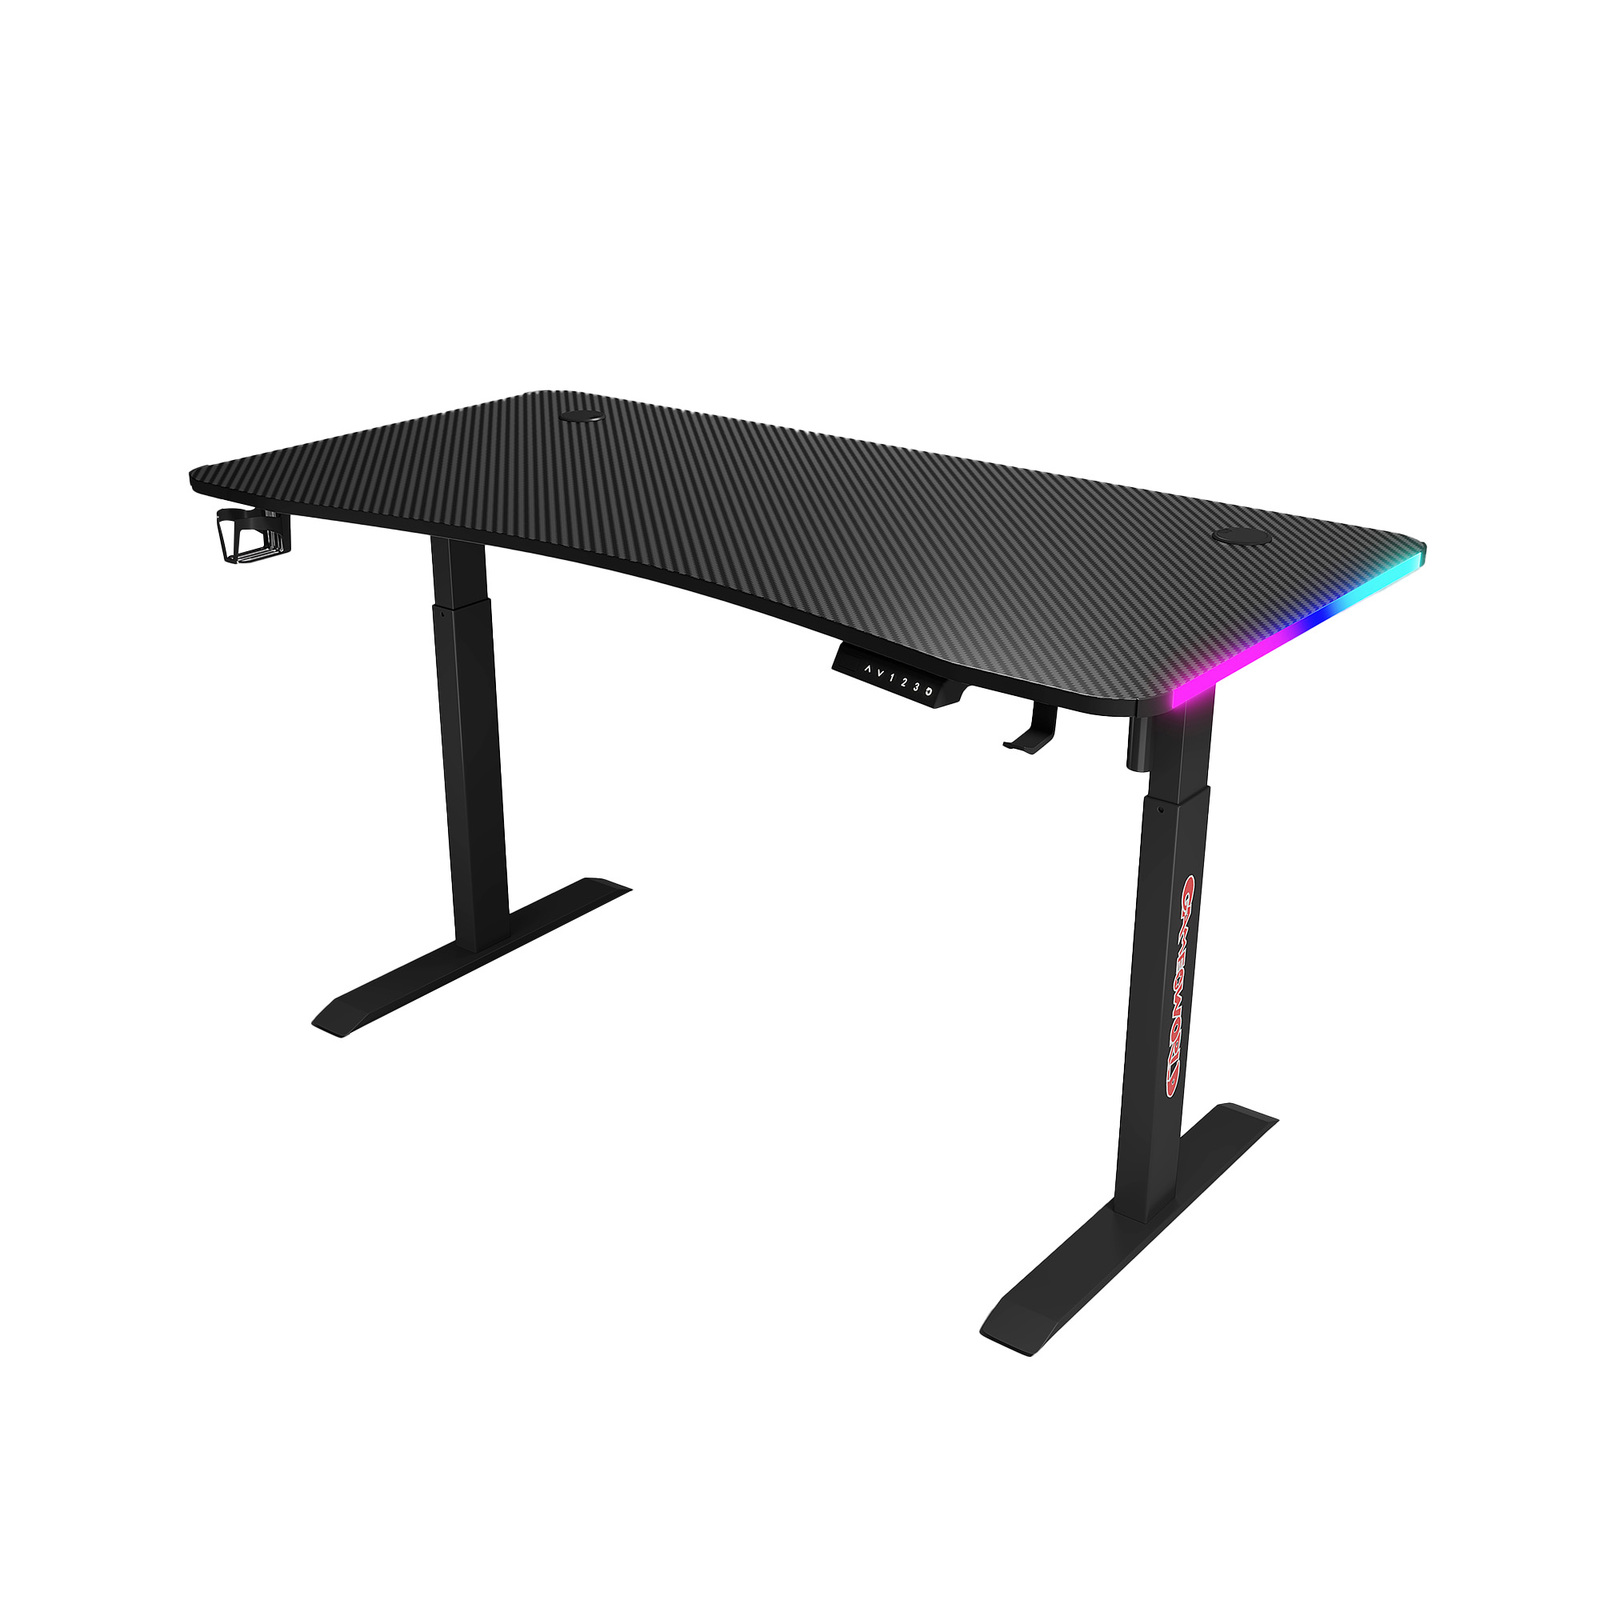 RGB LED Gaming Desk Single Motor Frame Leg with Cup and Headphone Holder - 3 Sizes